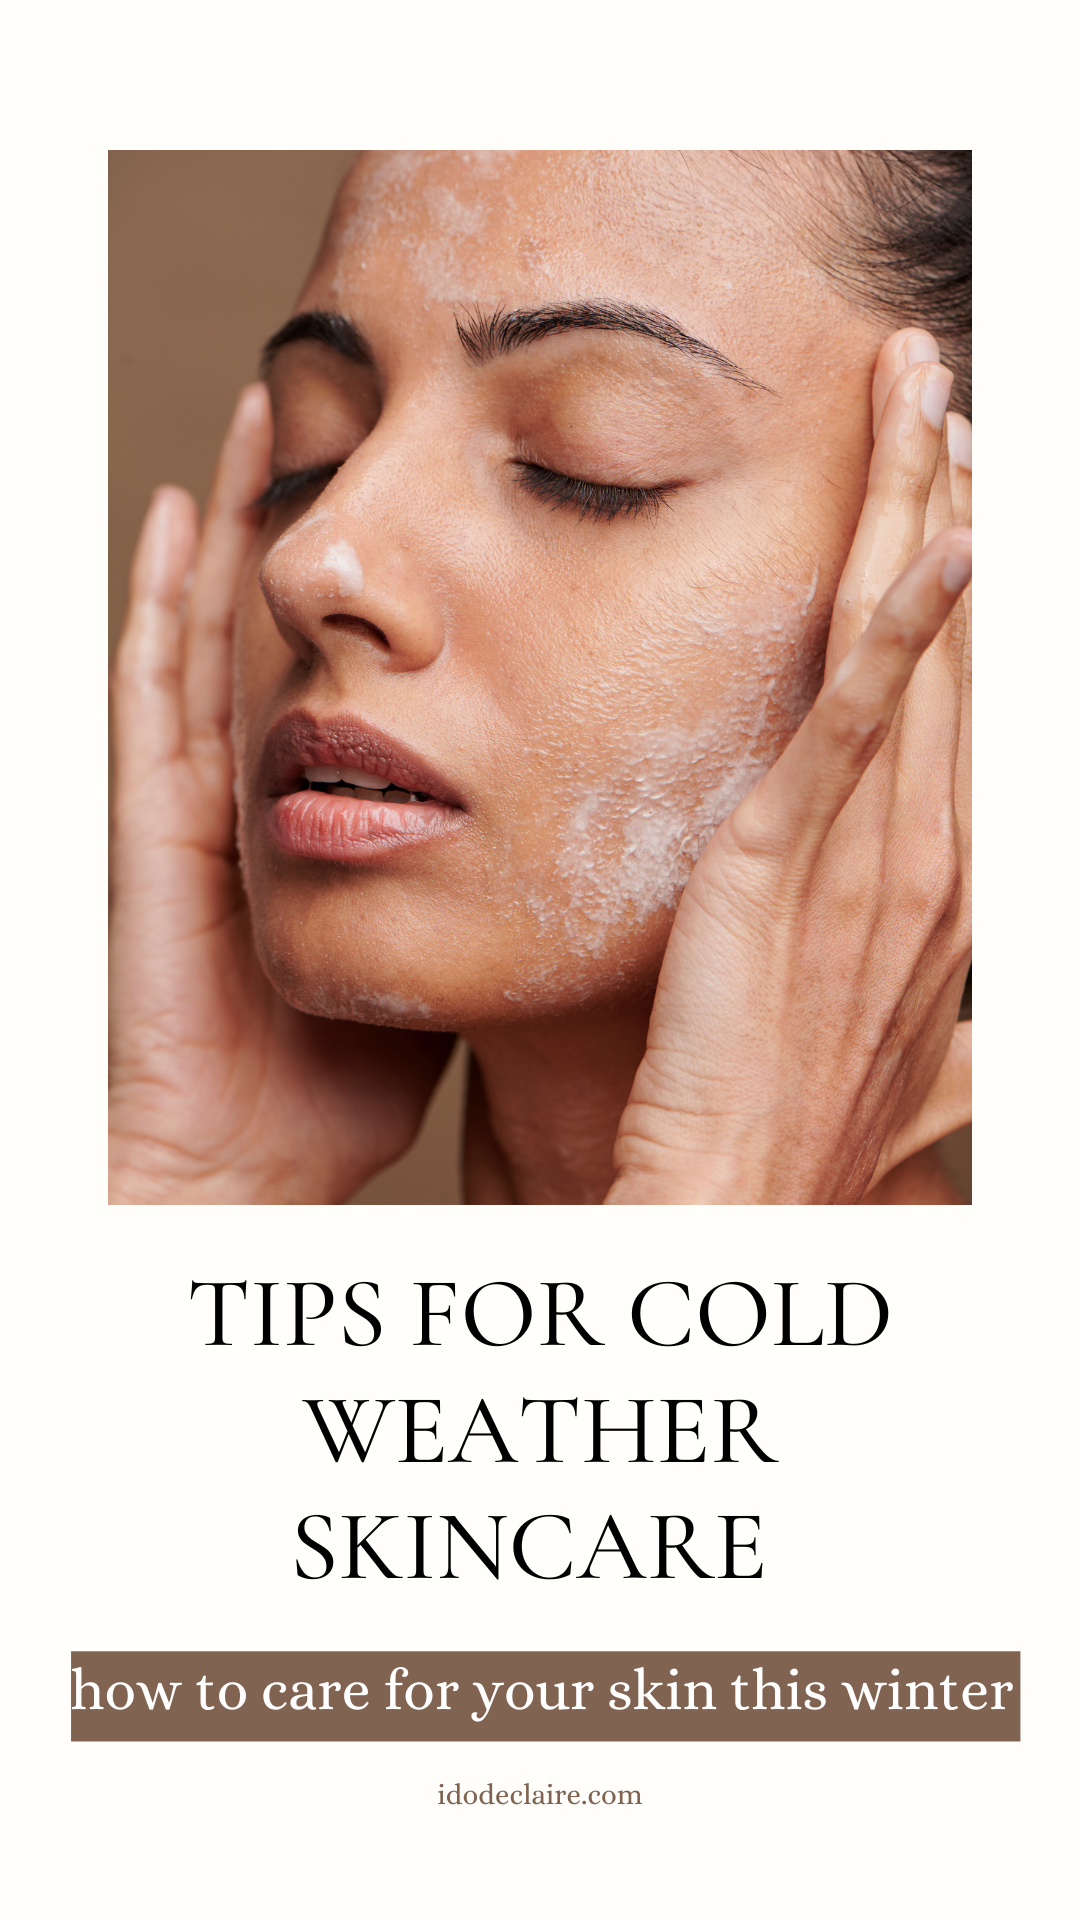 How to Care for Your Skin During Colder Weather